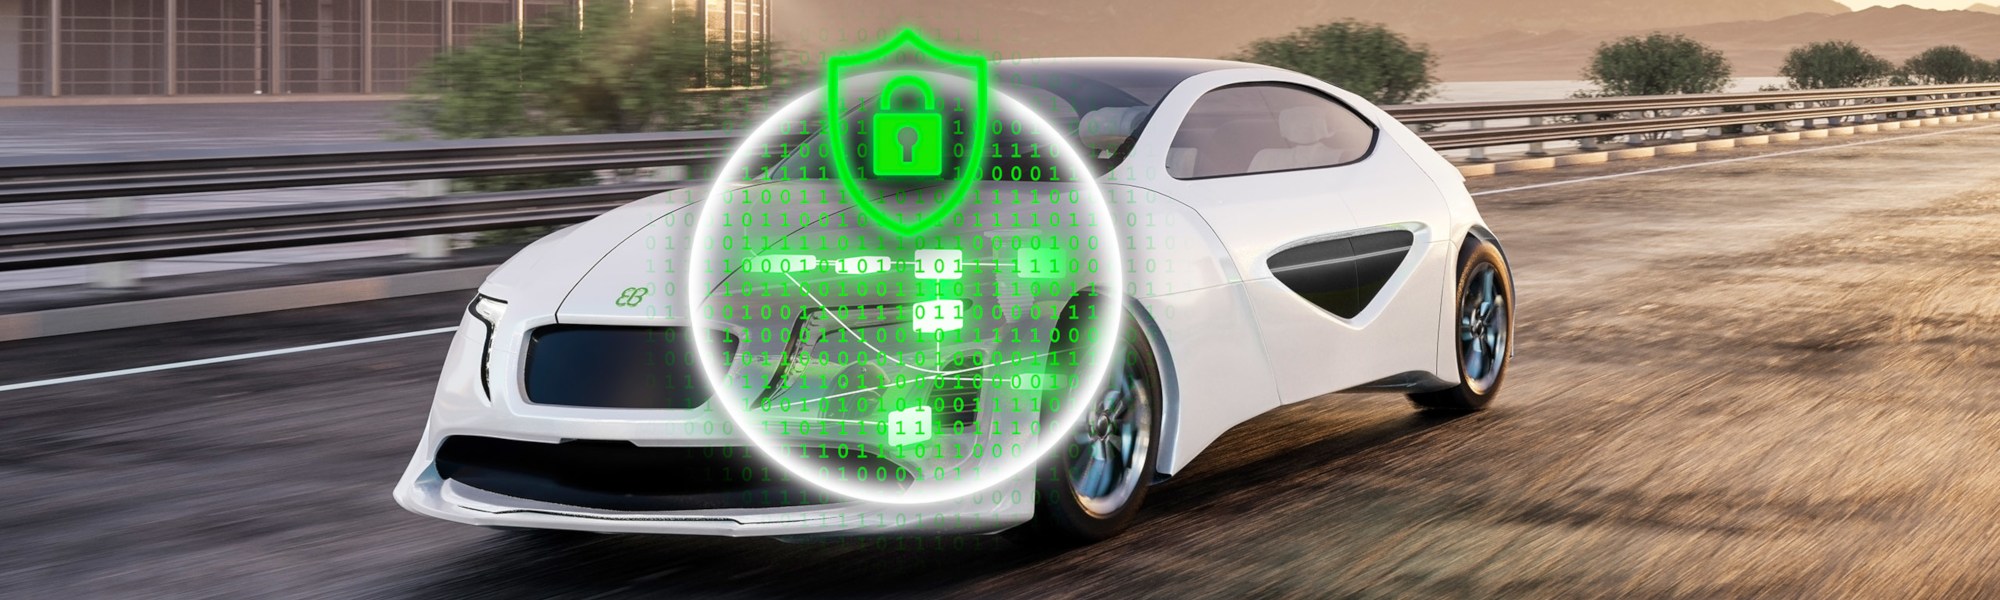 AUTOSAR Software Embedded Security